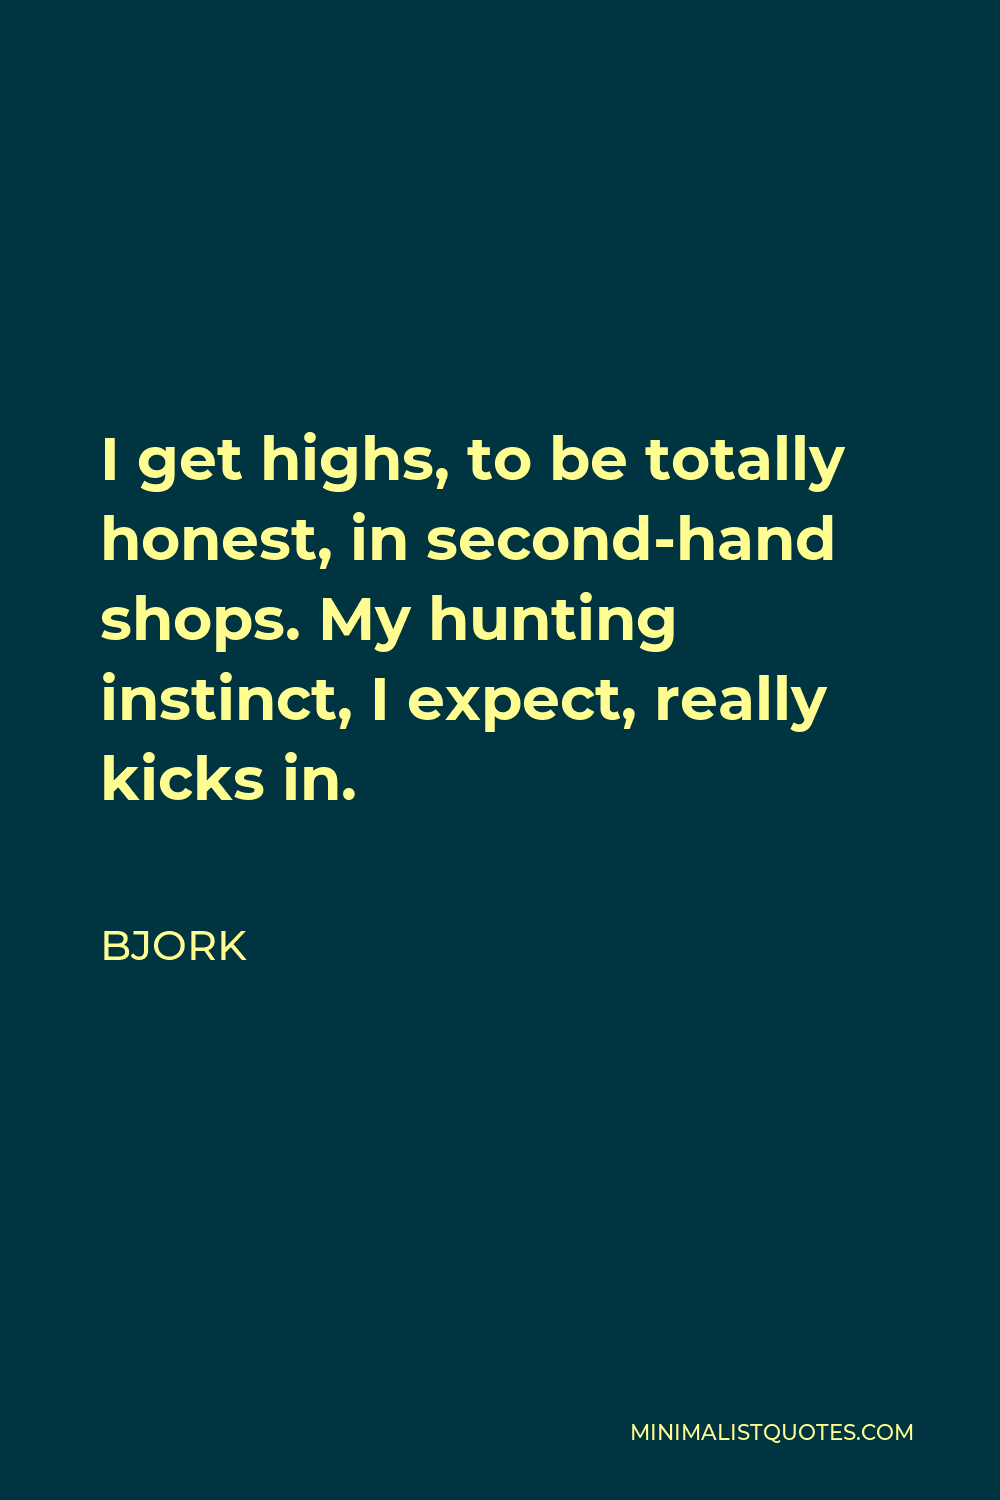 Bjork Quote - I get highs, to be totally honest, in second-hand shops. My hunting instinct, I expect, really kicks in.